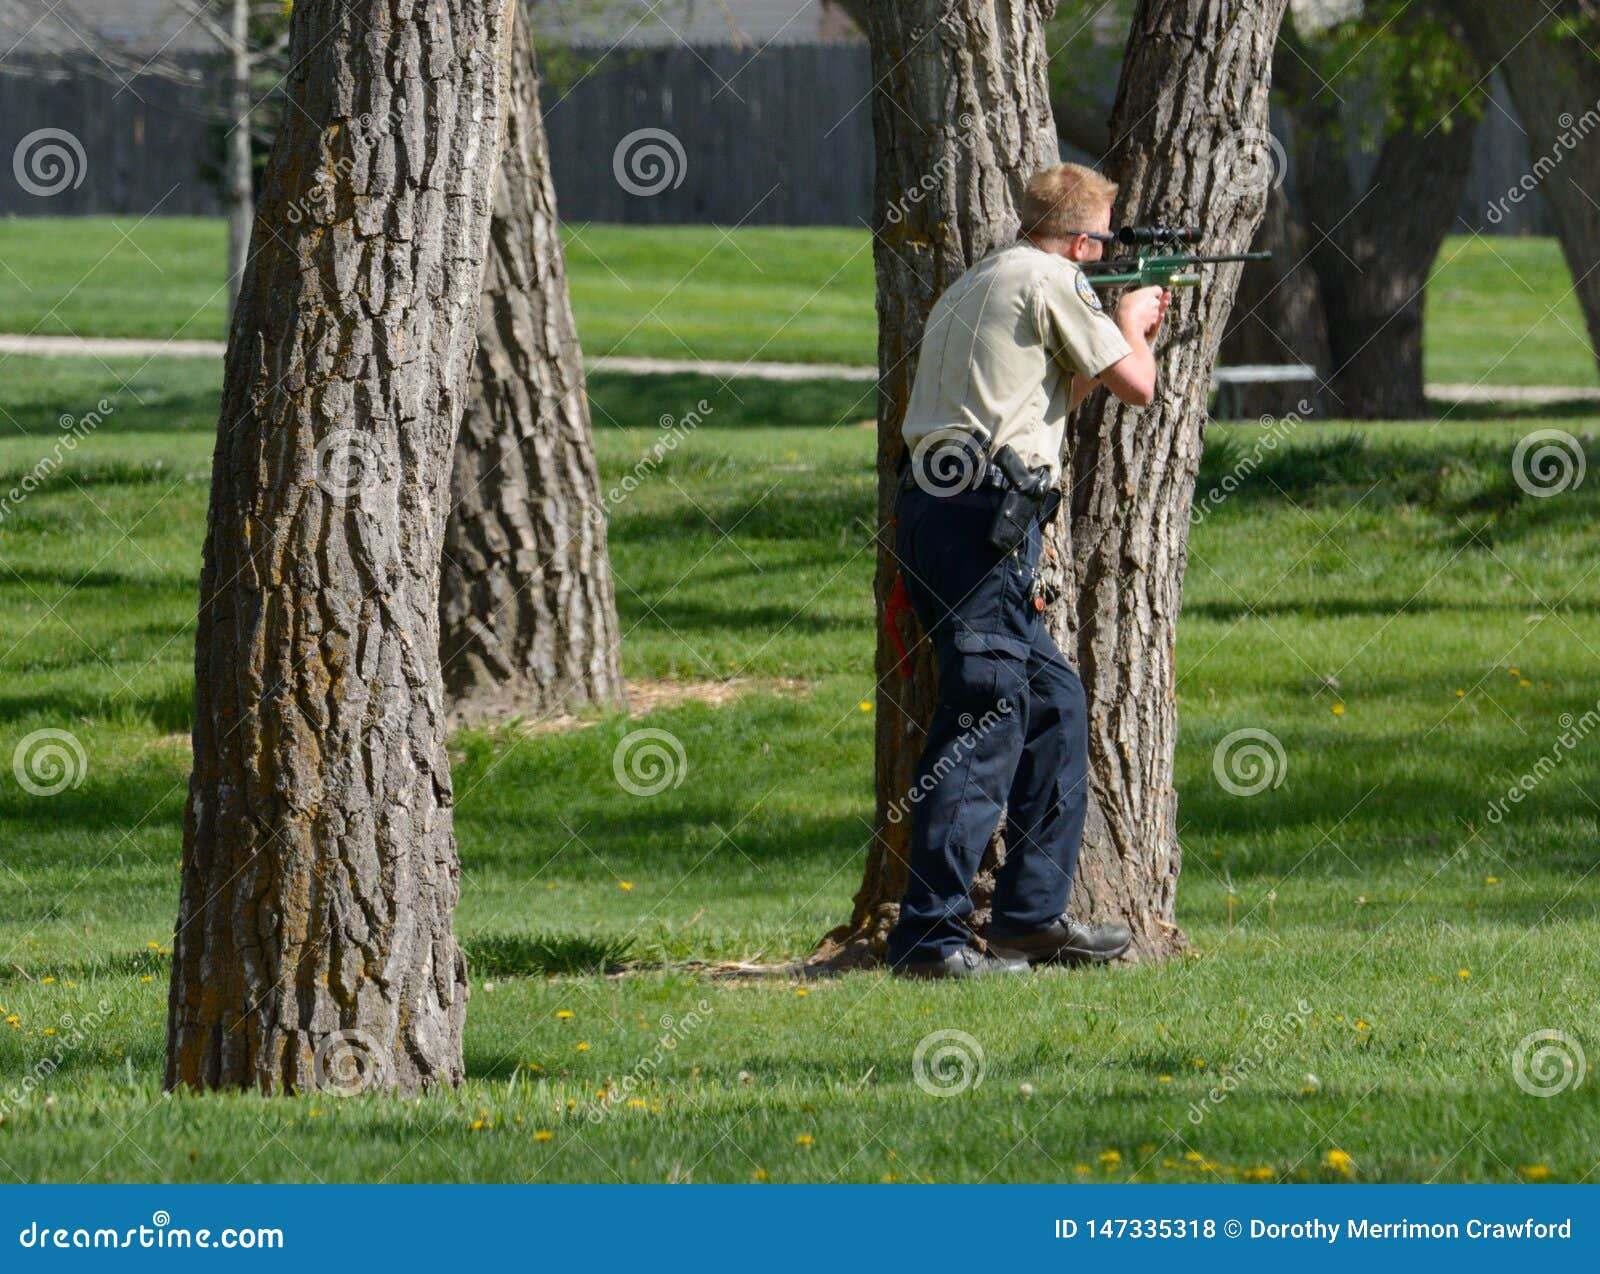 Shooting Tranquilizer at Urban Wildlife Editorial Stock Photo - Image of hiding, front: